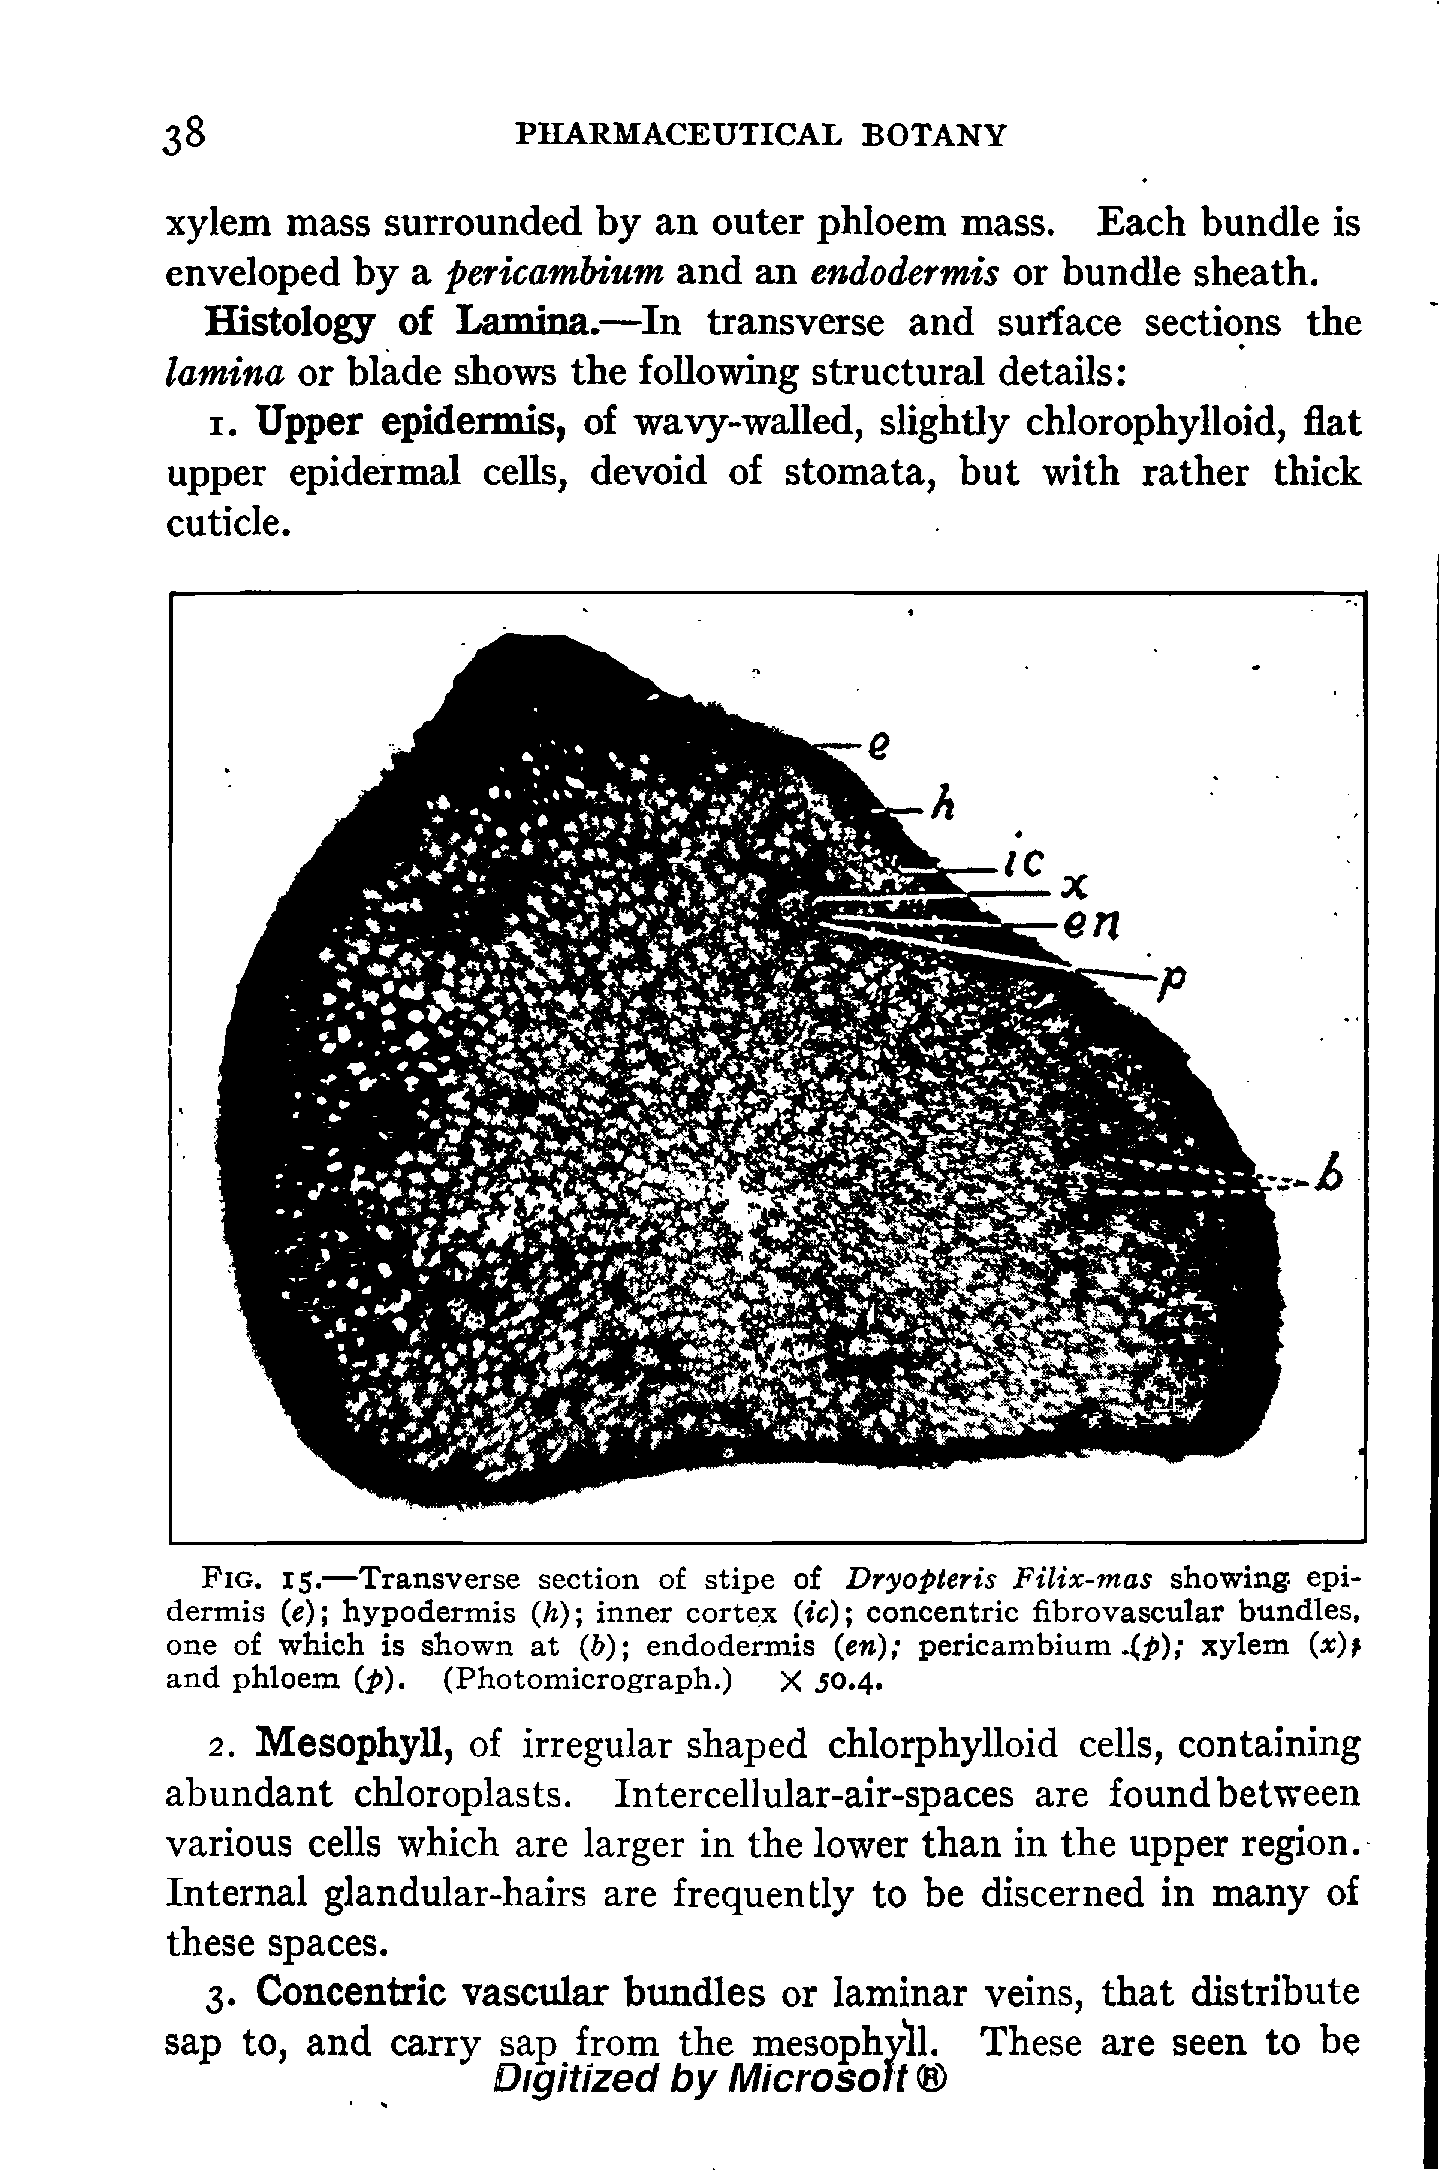 Fig. 15.—Transverse section of stipe of Dryopteris Filix-mas showing- epidermis (e) hypodermis (/i) inner cortex (tc) concentric fibre vascular bundles, one of which is shown at (b) endodermis (en) pericambium xylem and phloem (p). (Photomicrograph.) X iO.4.